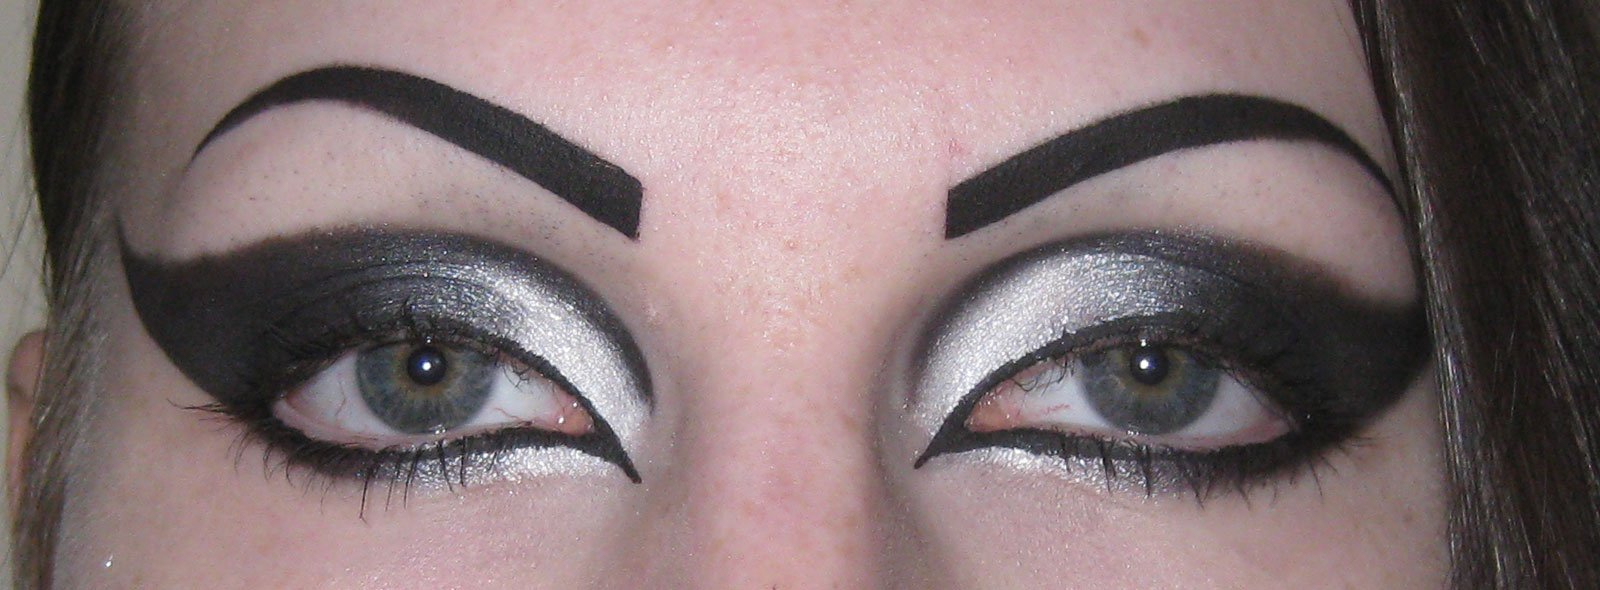 Wing Eye Makeup Tutorial Dramatic Gothic White To Black Extended Winged Cat Eye Makeup